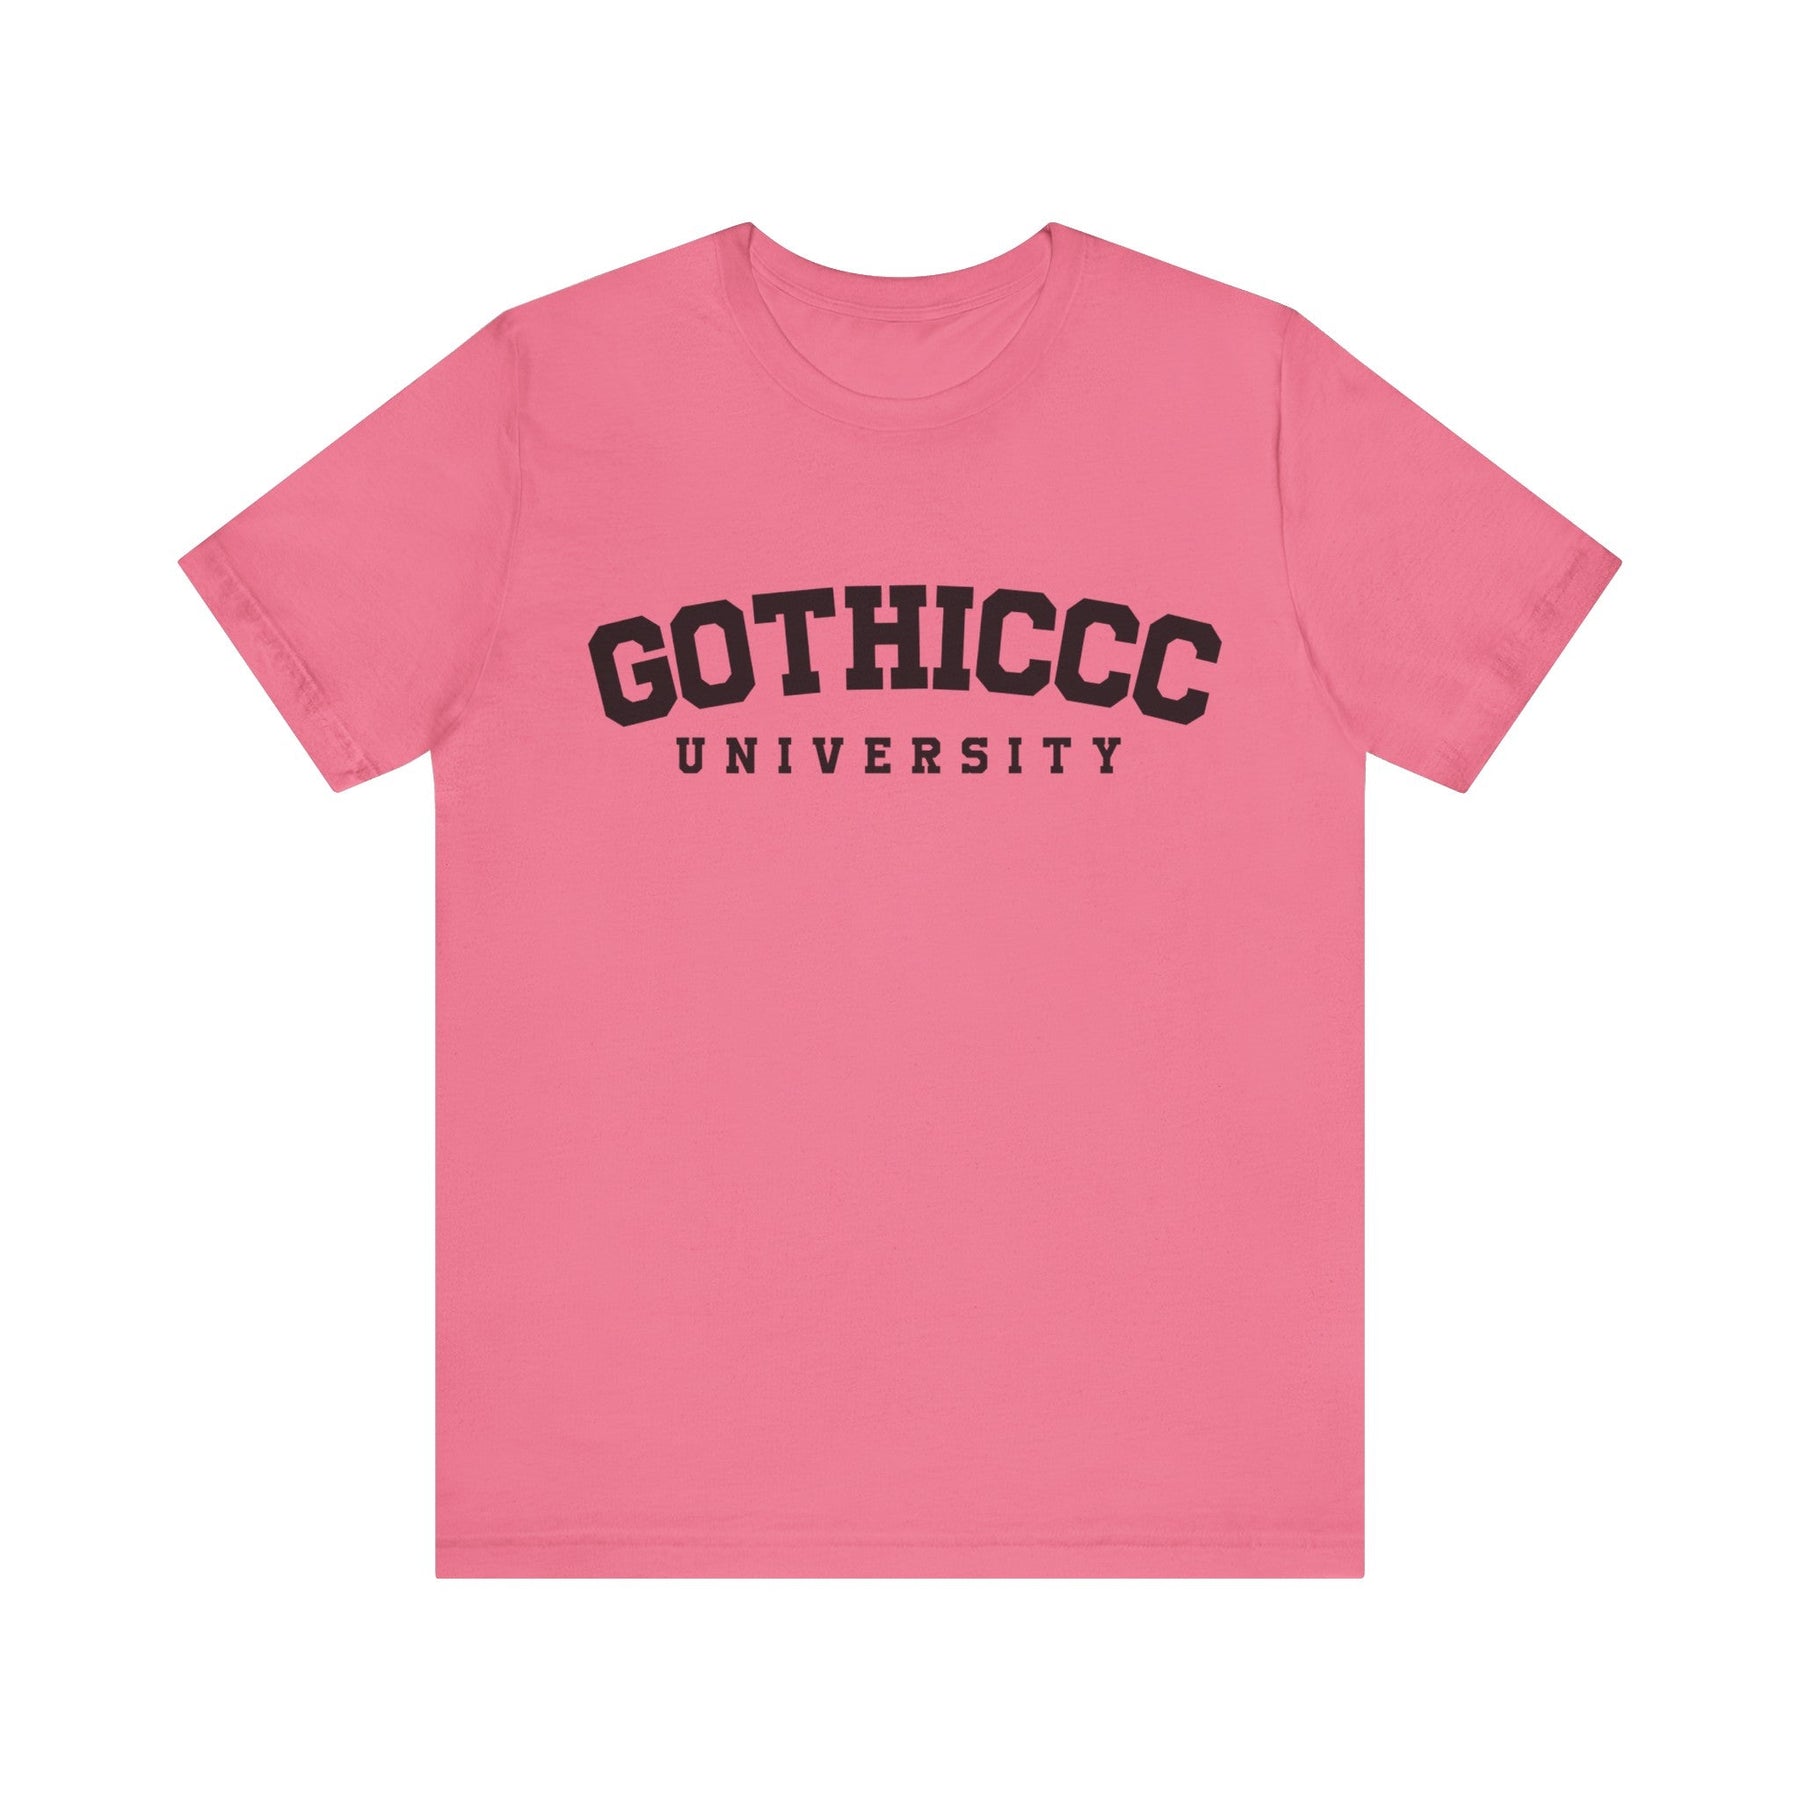 Gothiccc University Short Sleeve Tee - Goth Cloth Co.T - Shirt11952530762656276803